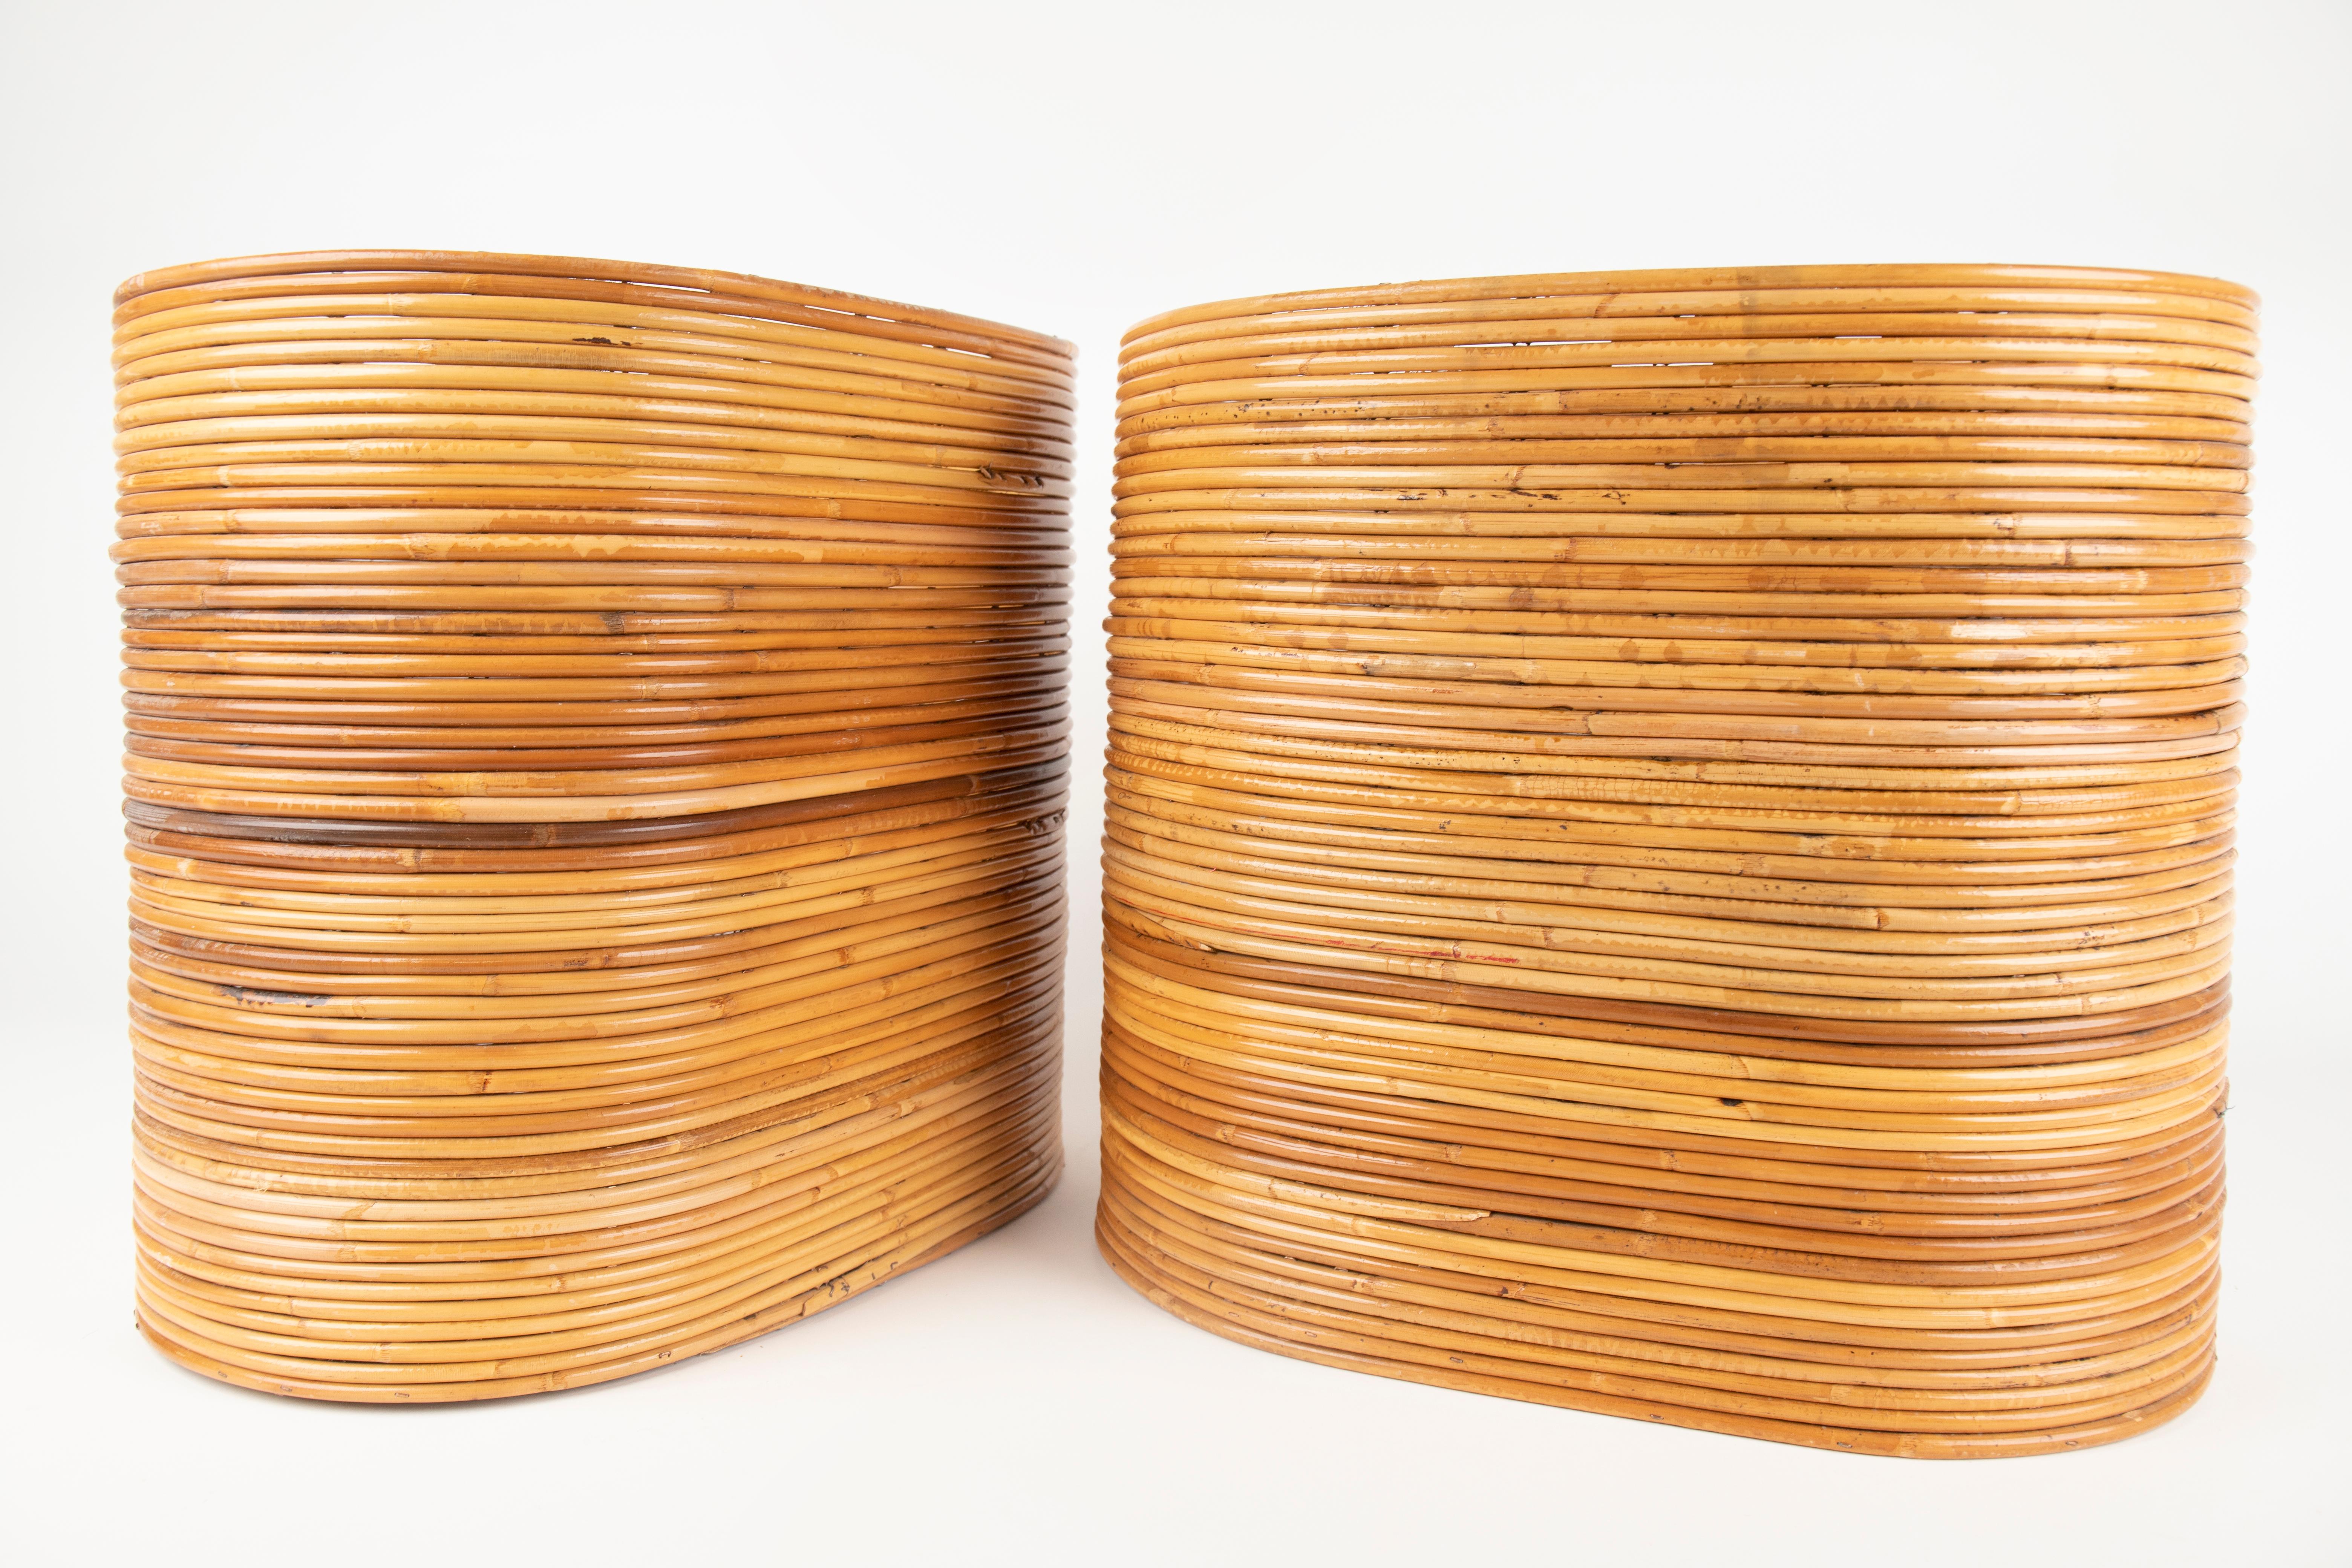 Italian Mid-Century Pair of Rattan and Bamboo Oval Basket Plant Holder Vase, Italy 1960s For Sale